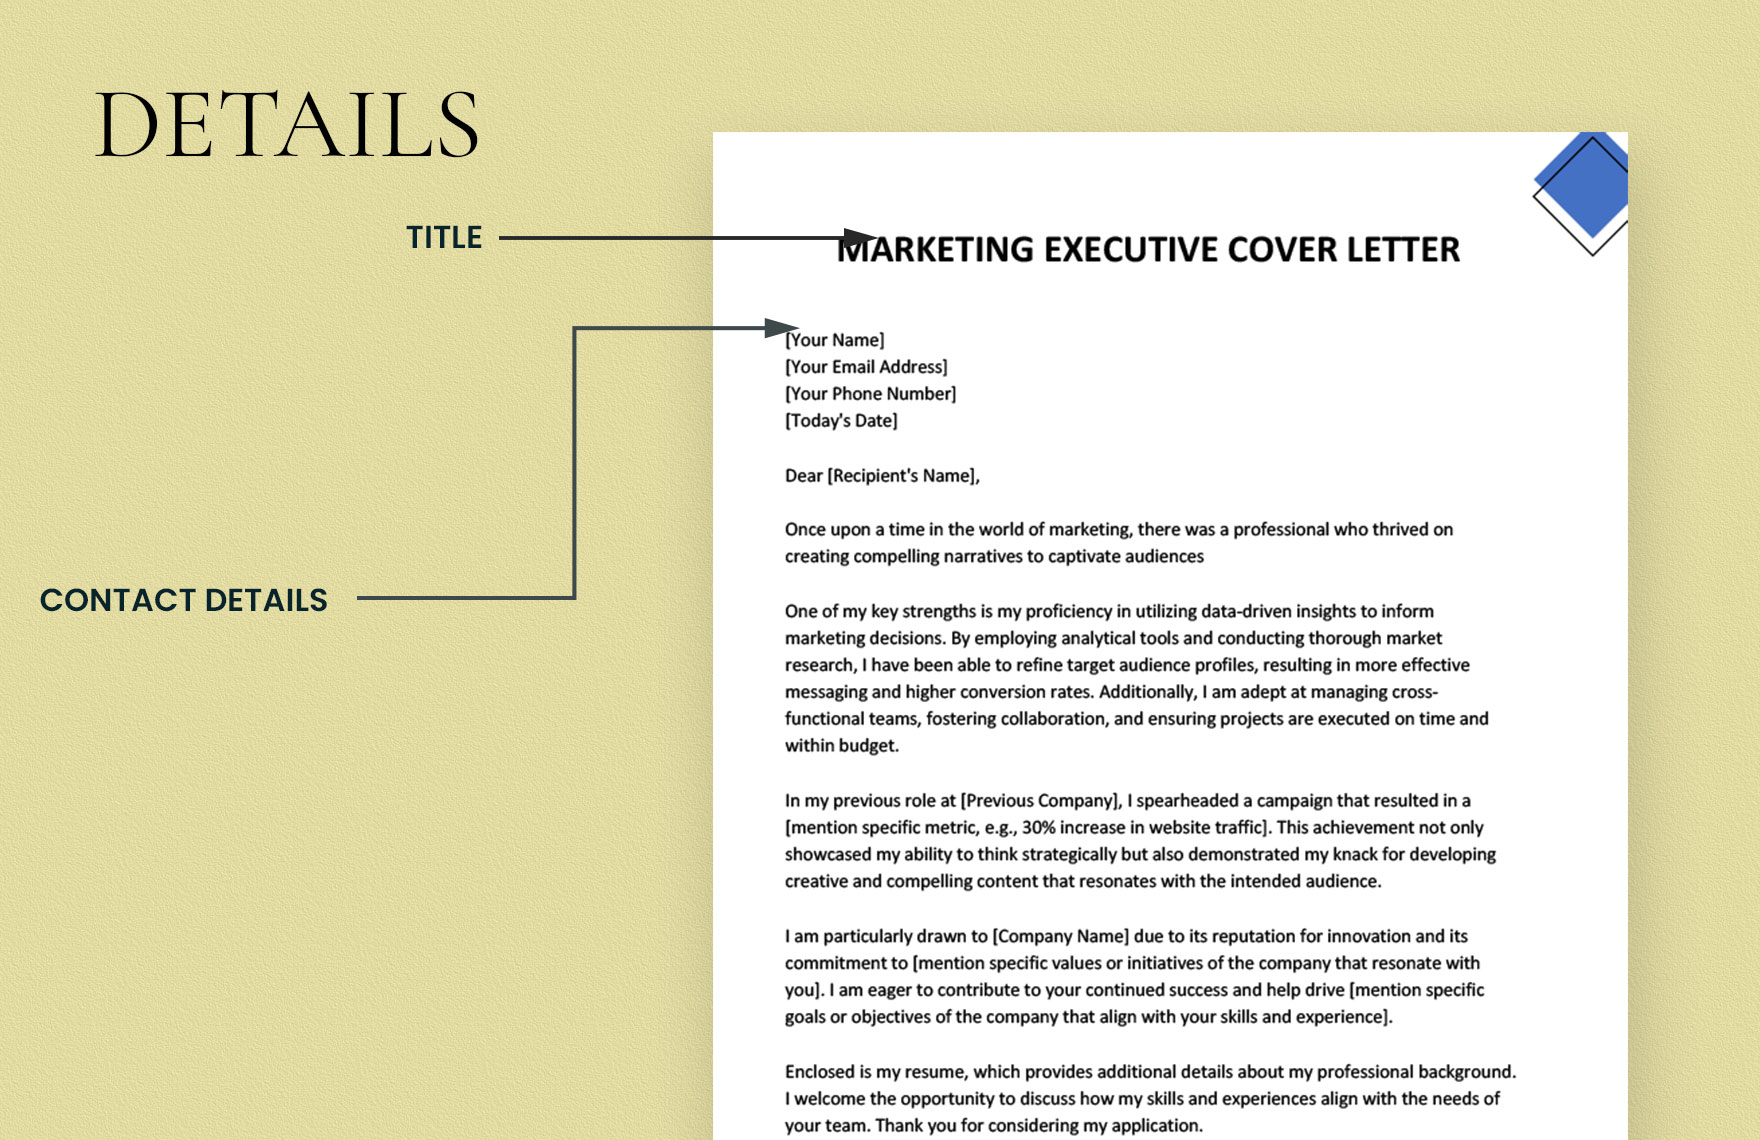 Marketing Executive Cover Letter